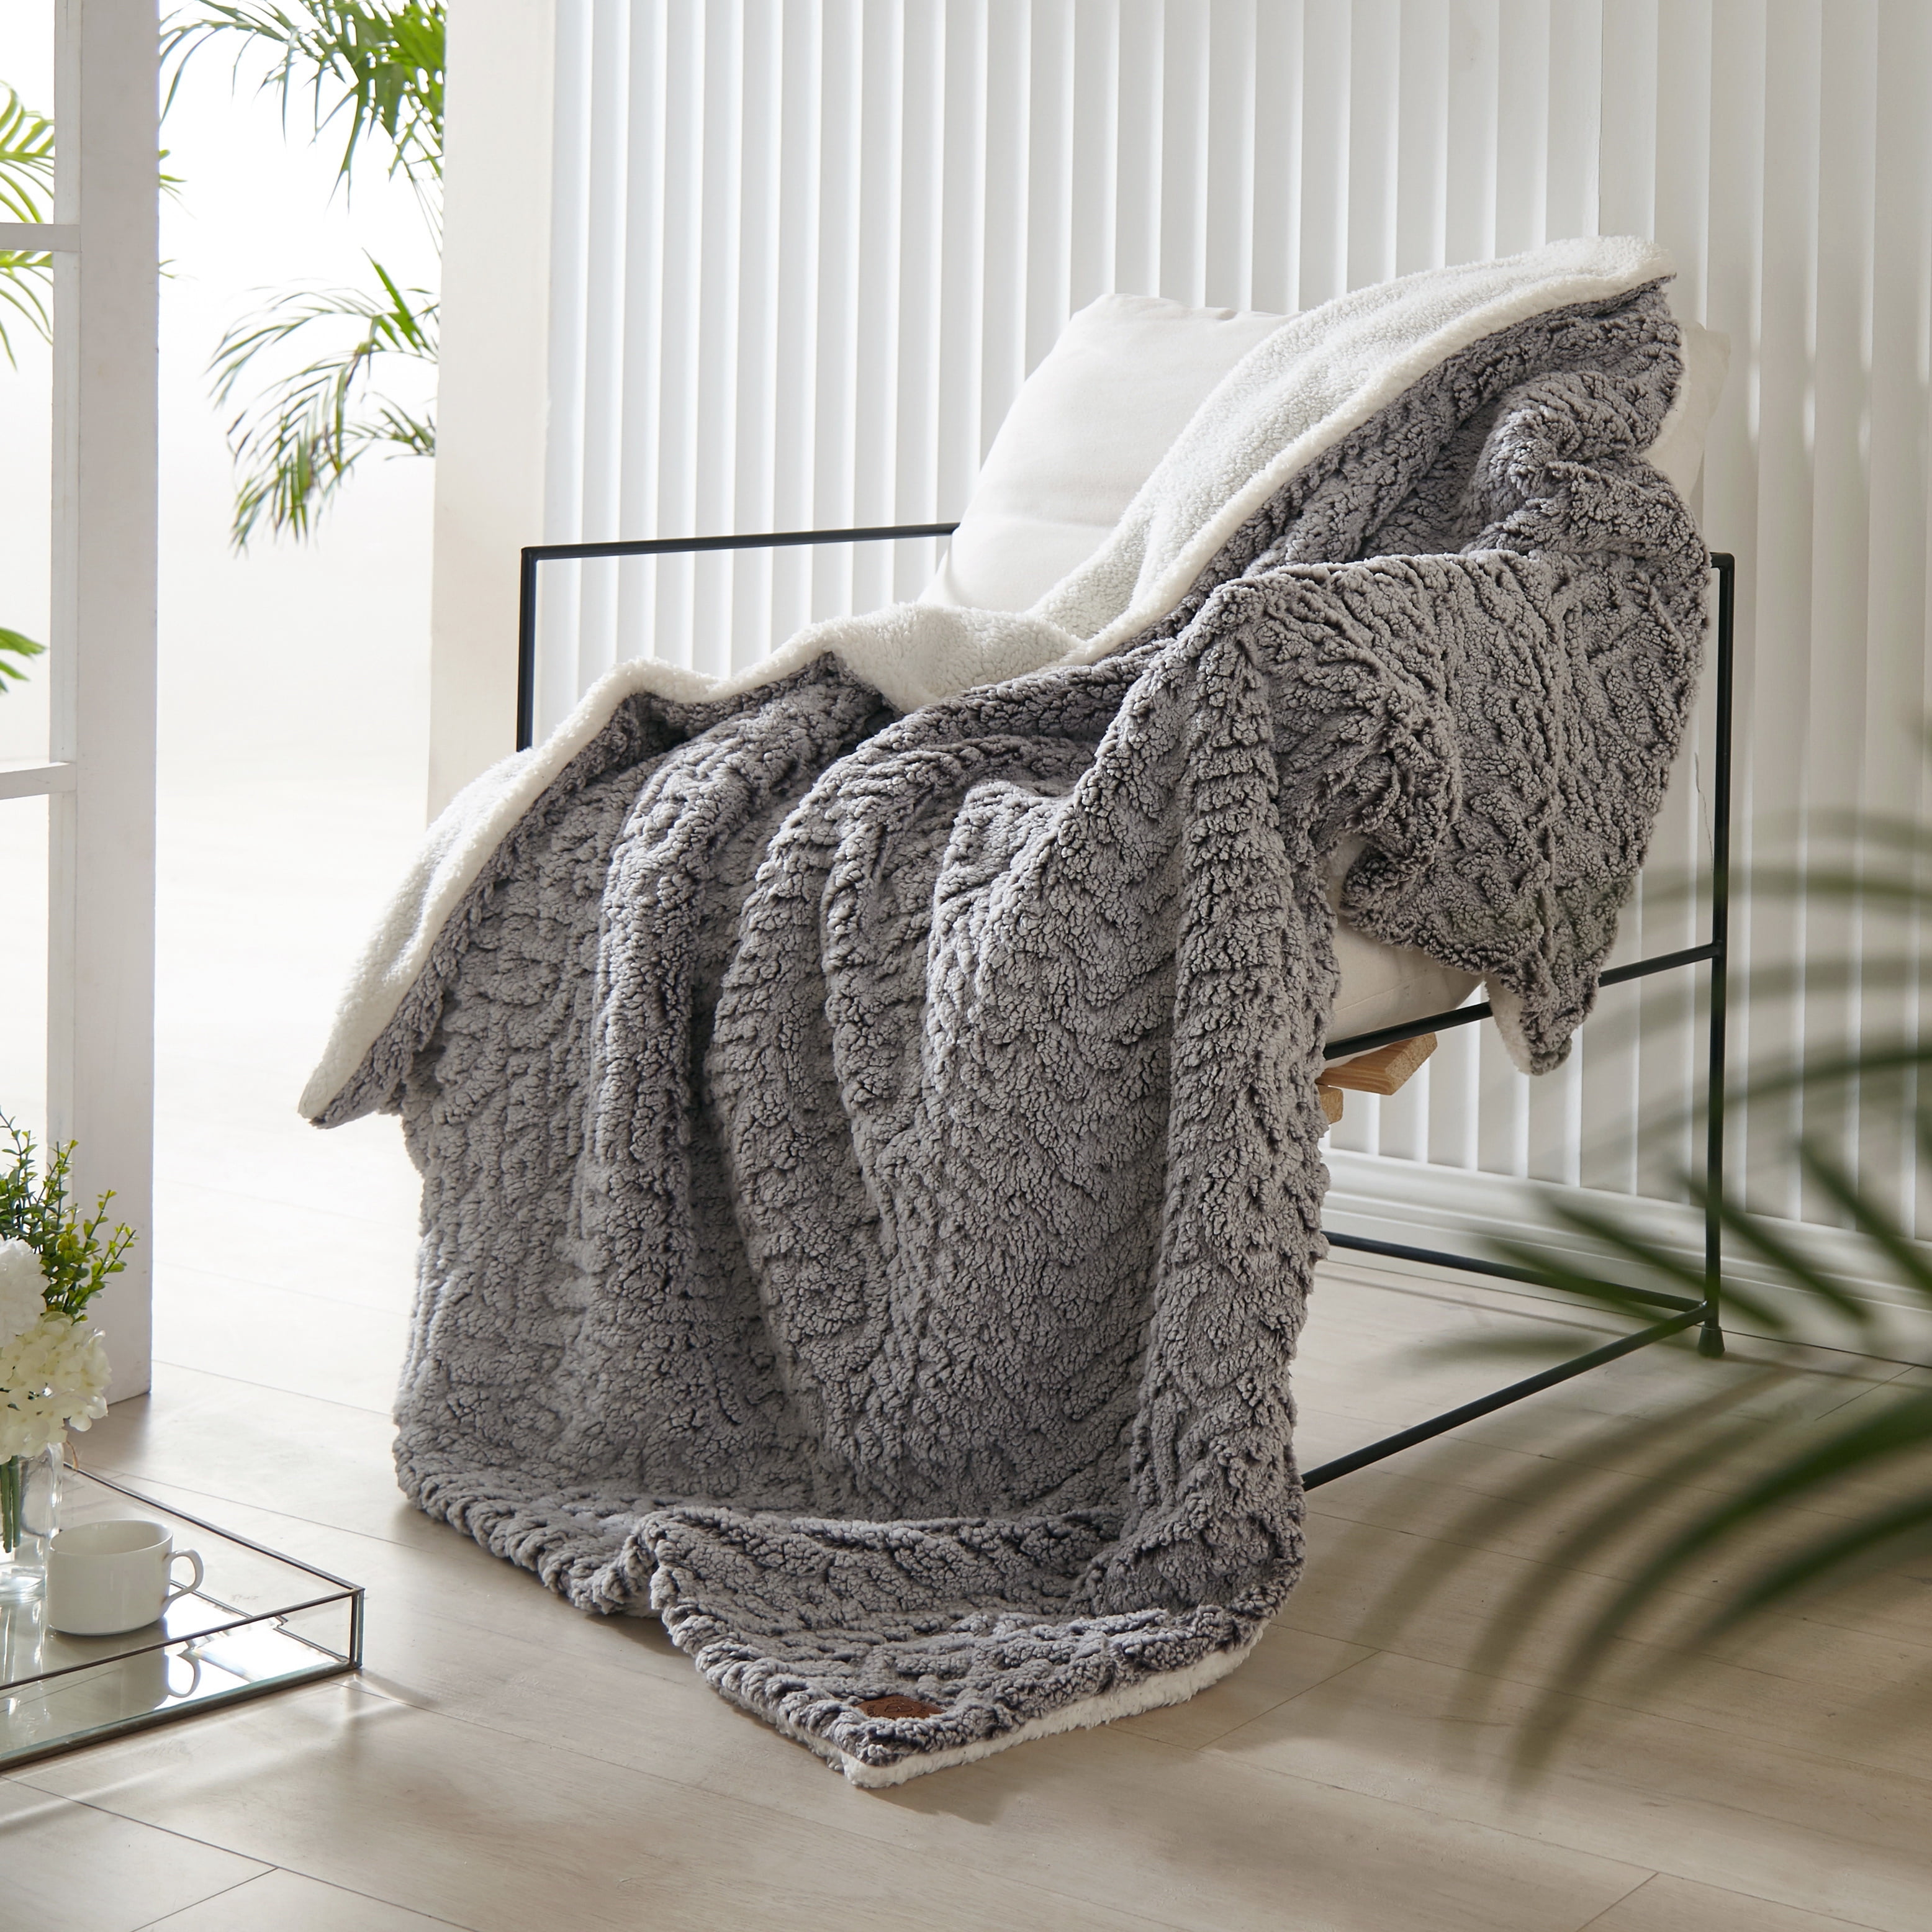 ELEGANT CLOUDY SHERPA EMBOSSED BLANKET VERY SOFTY AND WARM QUEEN SIZE GRAY 